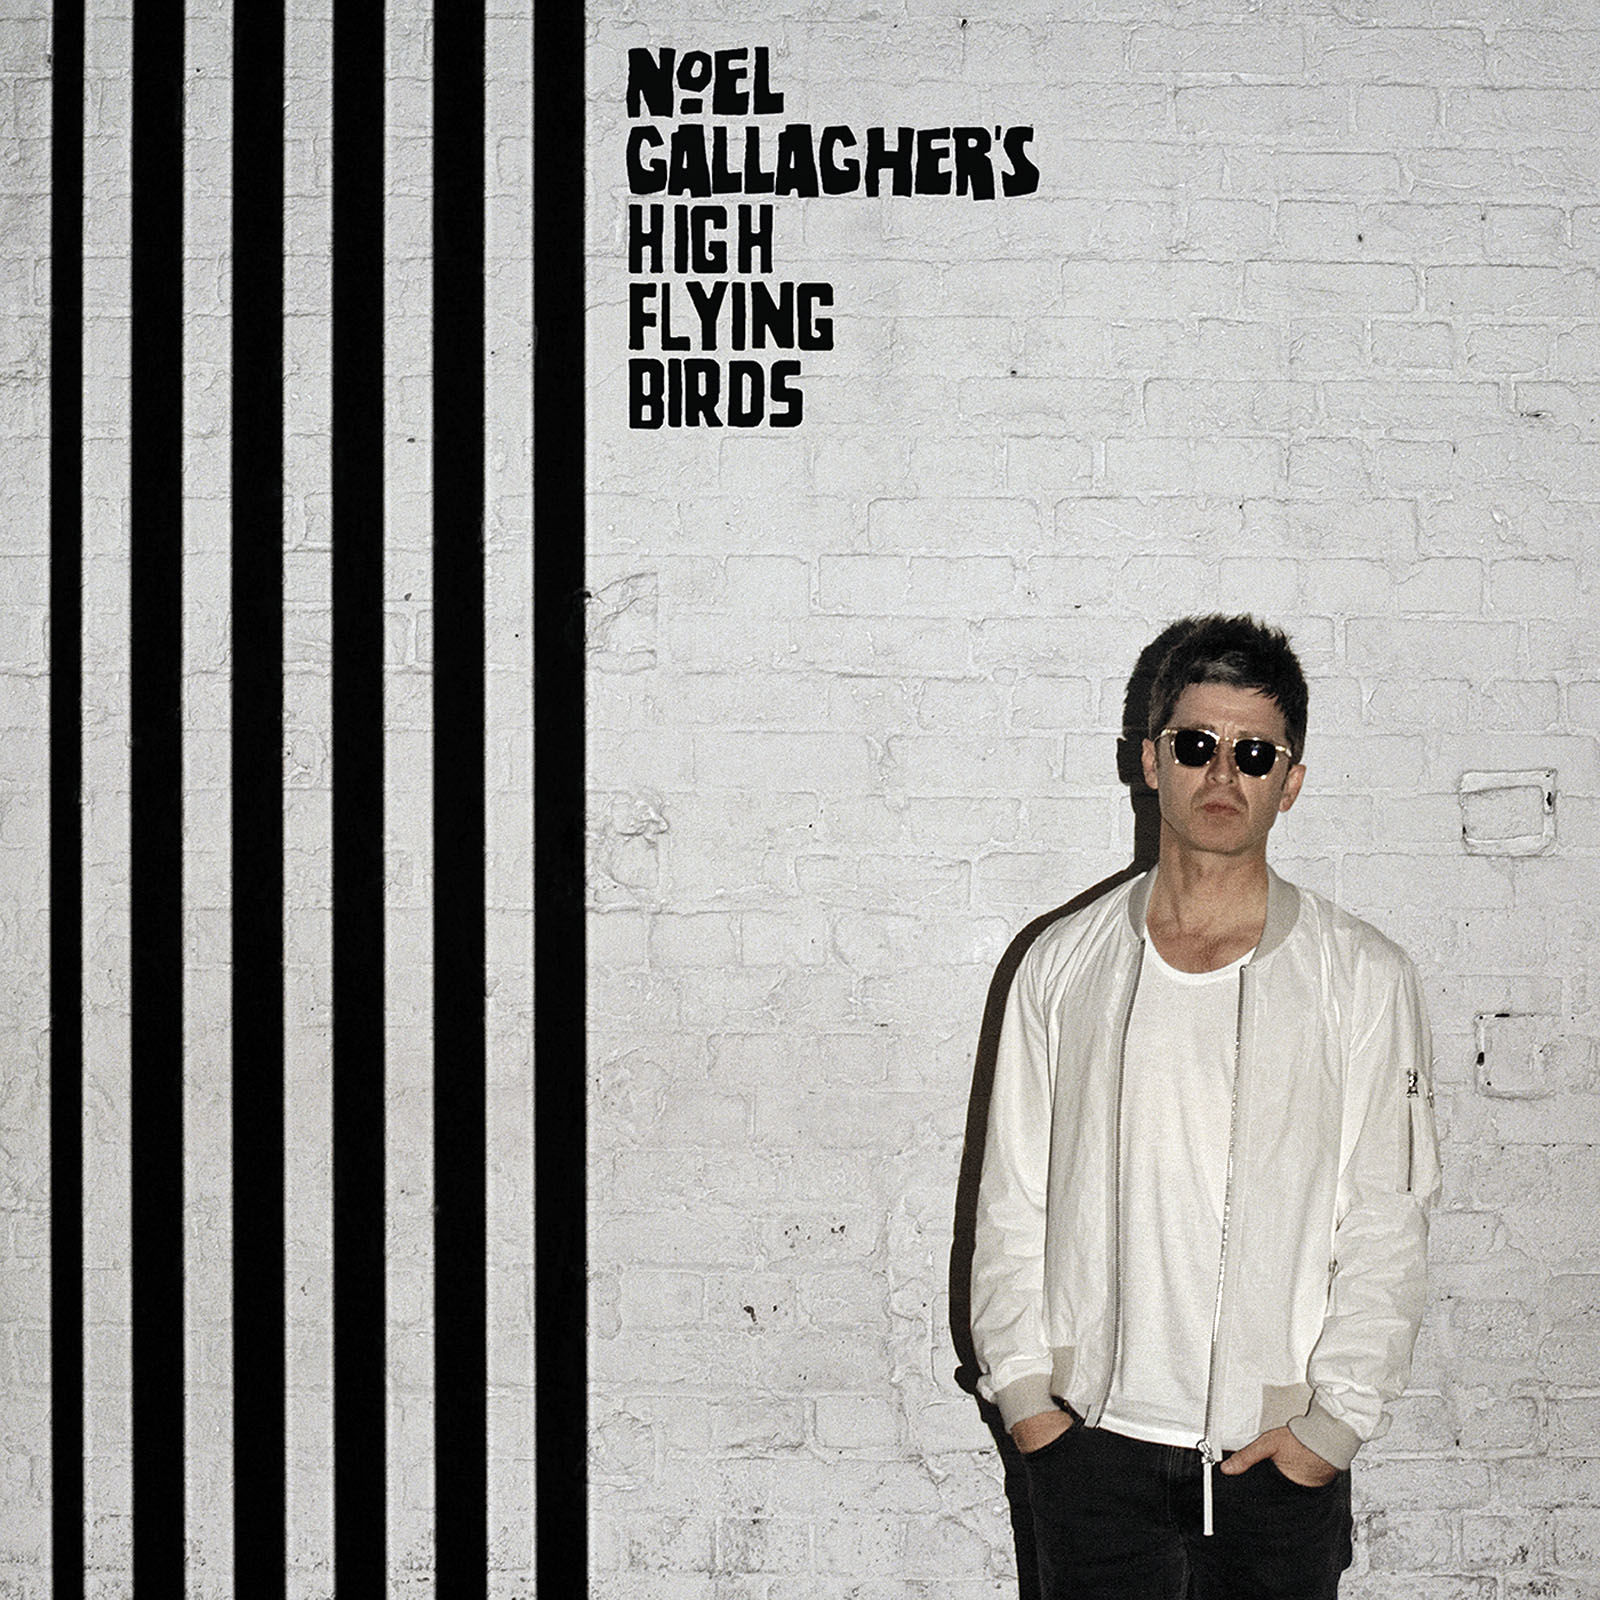 Noel Gallagher's High Flying Birds- In The Heat Of The Moment (Chasing Yersterday   어쌔신 크리드 신디케이트)